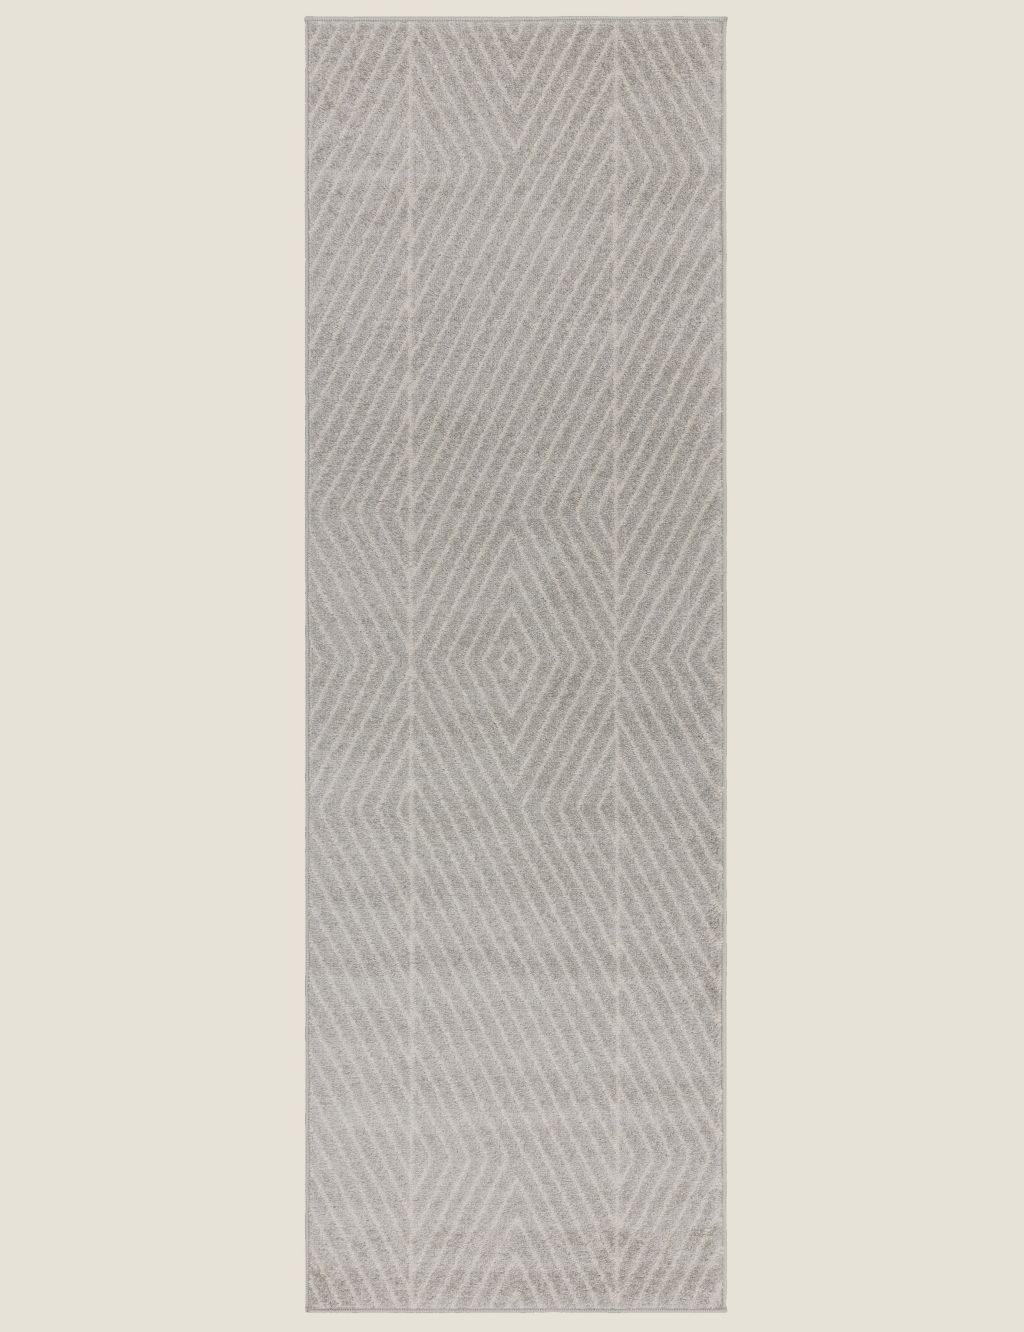 Muse Linear Rug image 2